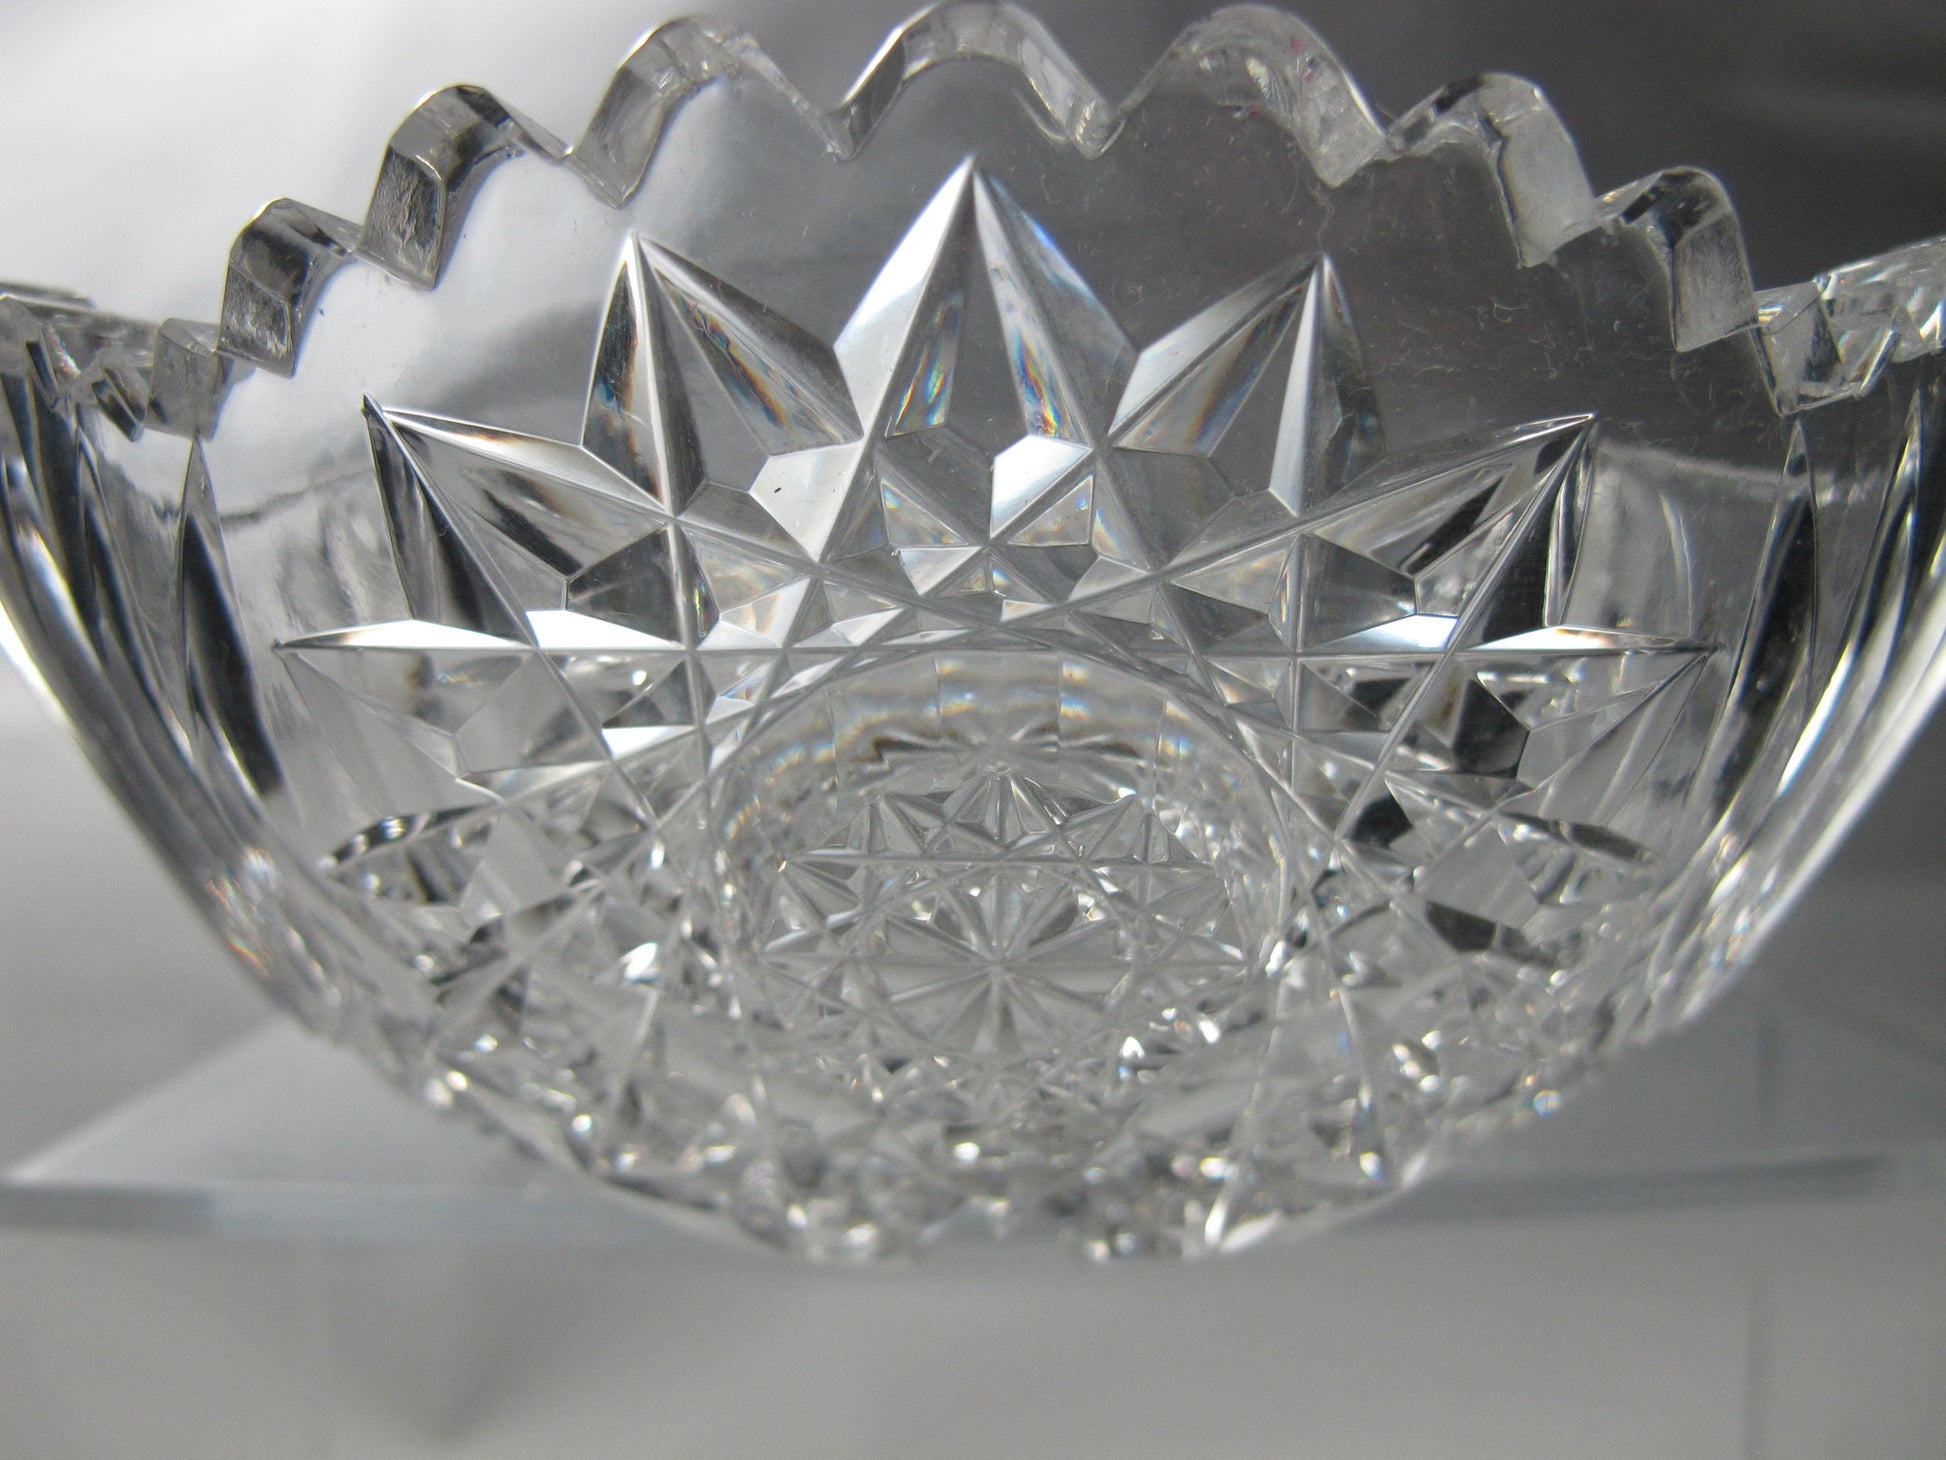 American Brilliant Period Cut Glass  ABP  Antique 7" bowl Made in USA - O'Rourke crystal awards & gifts abp cut glass